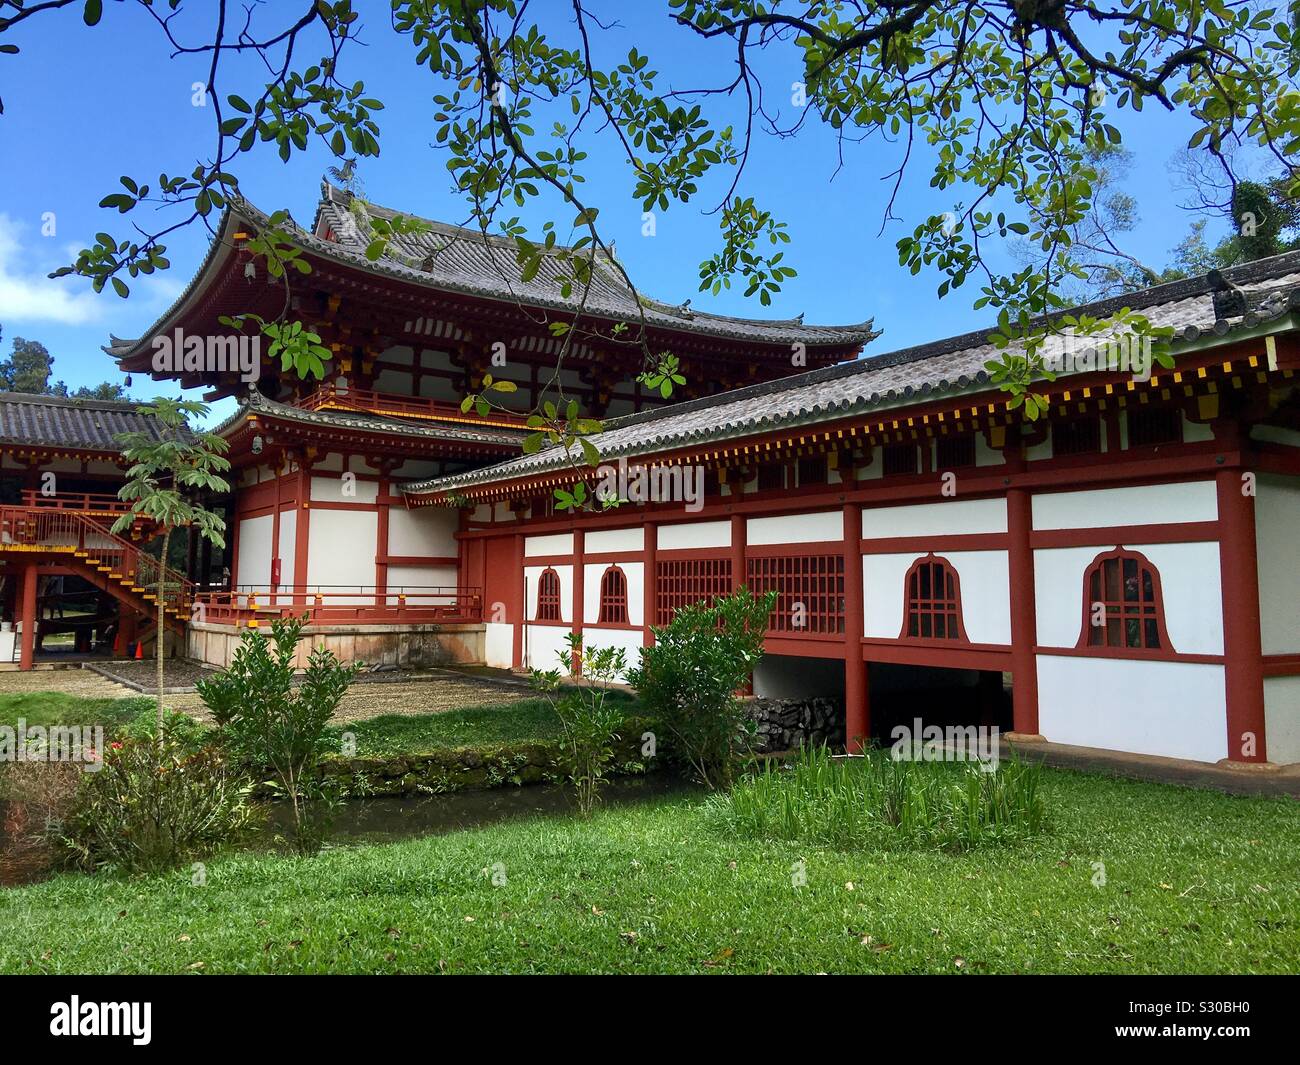 The Byodo-In Temple, Valley of the Temples Memorial Park, Kahaluu, O'ahu, Hawaii Stock Photo